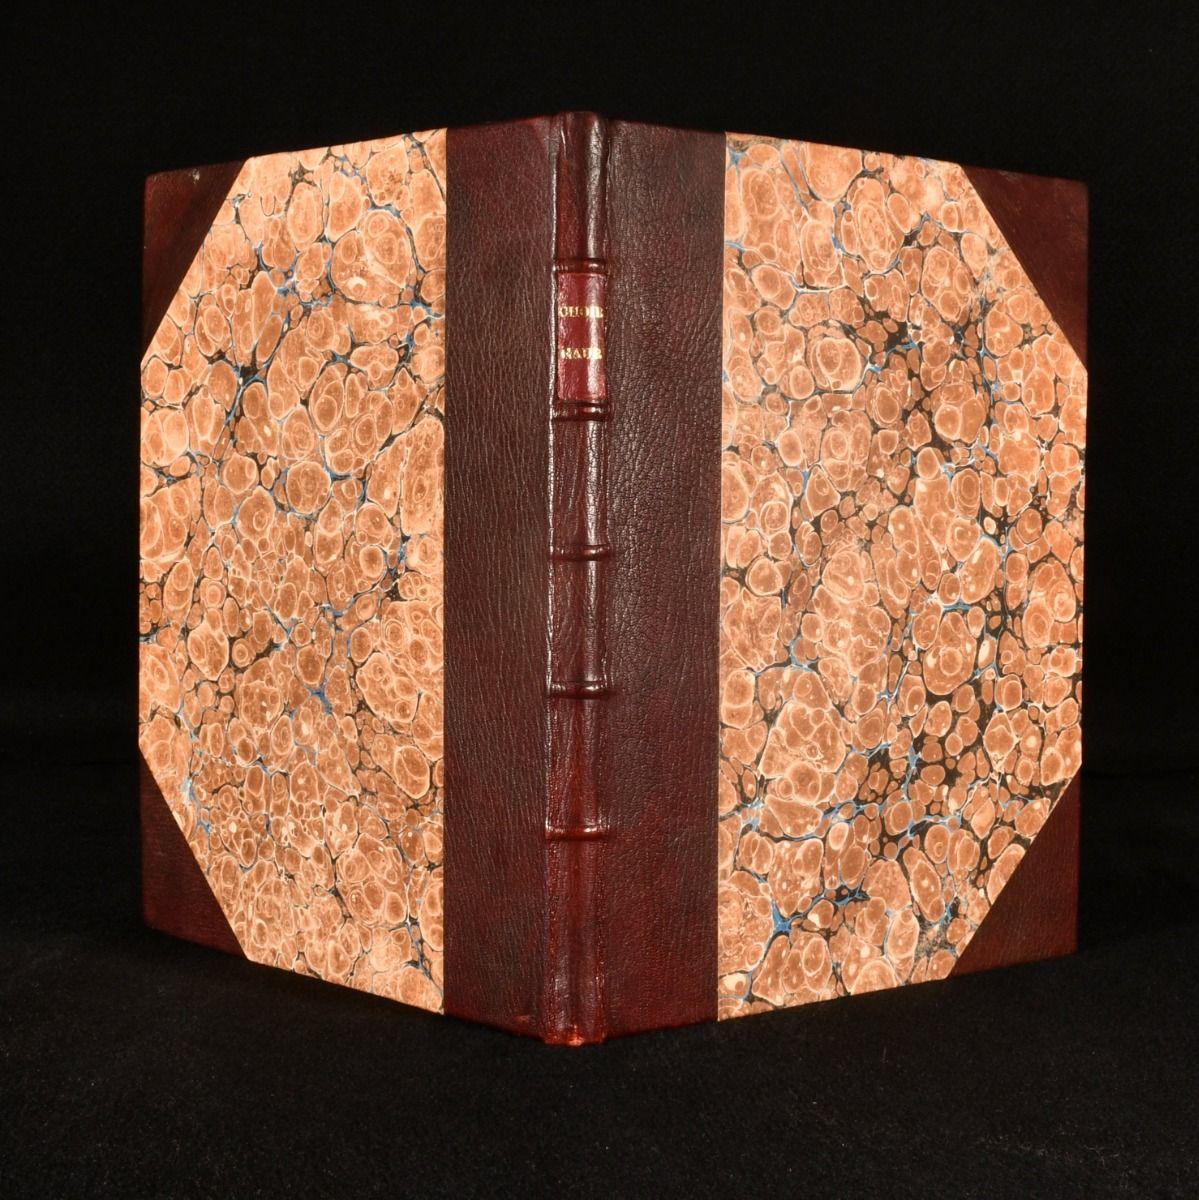 A scarce first edition of John Smith's study of the prehistorical monument Stonehenge, a early work on the subject, illustrated with three folding plates.

The scarce first edition of this work.

Illustrated with three copper engraved folding